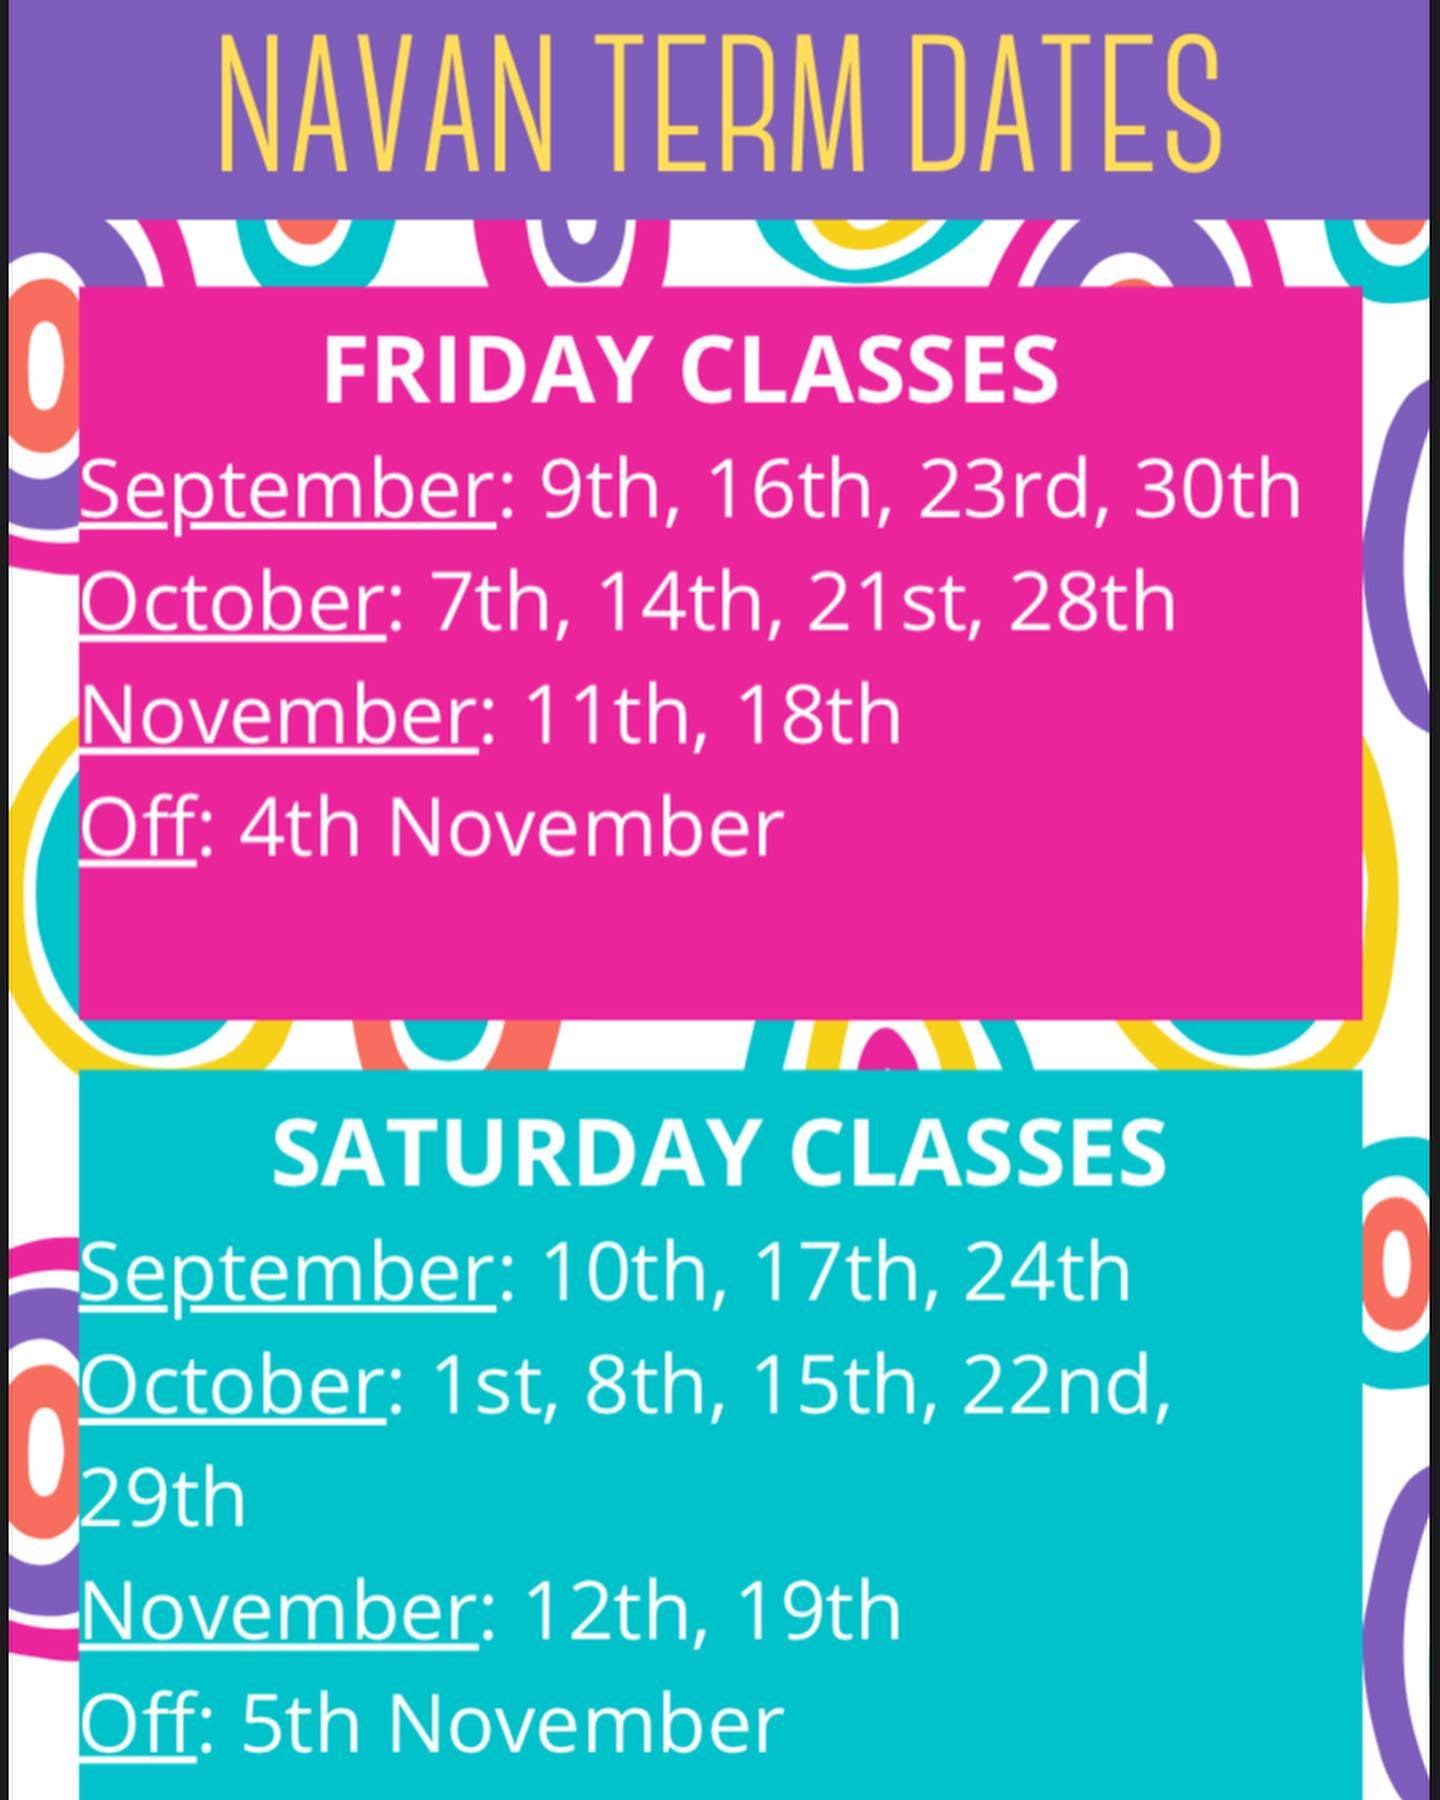 Bouncing back to classes in Navan this Friday the 9th and 10th of September.

Classes in Blackrock start back from Monday the 12th of September.

Classes in Trim will resume on the 14th and 15th of September.

Looking forward to seeing both current a